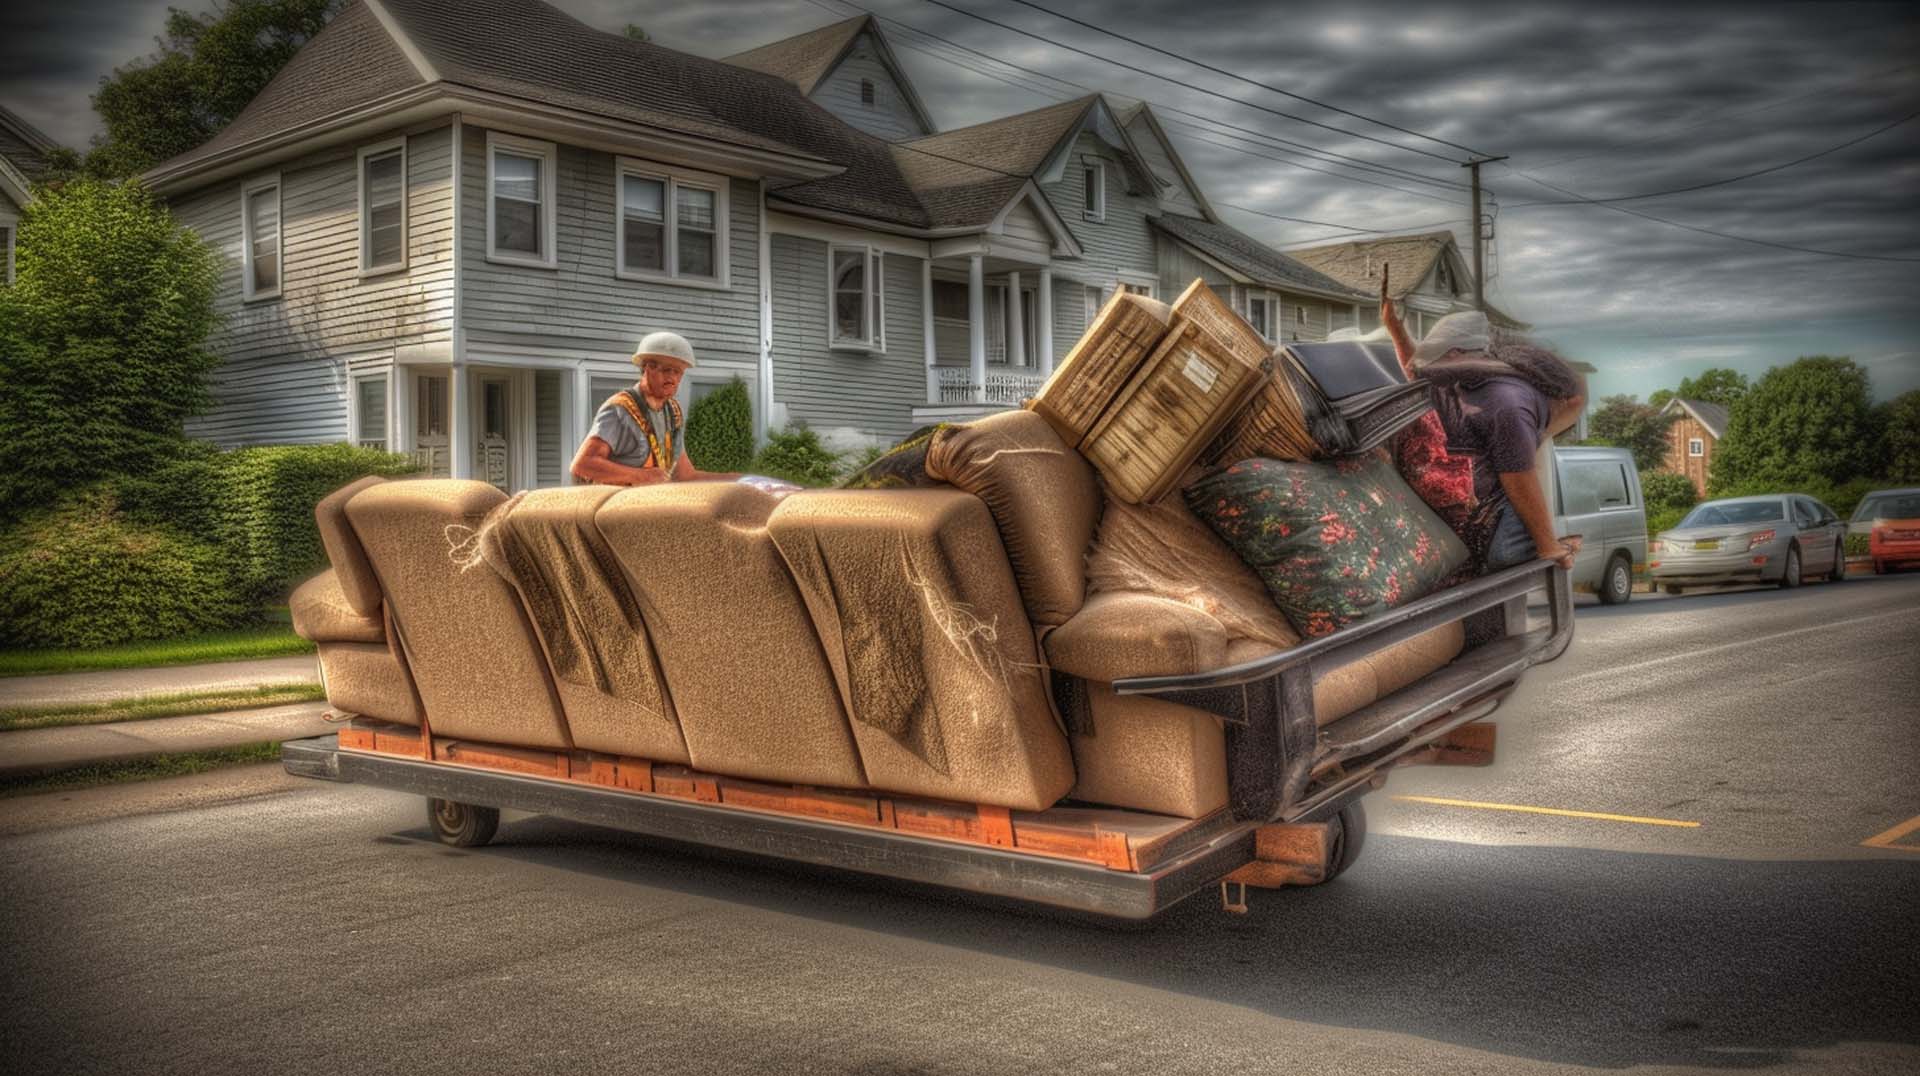 Residential Junk Removal Services in Baie-Comeau